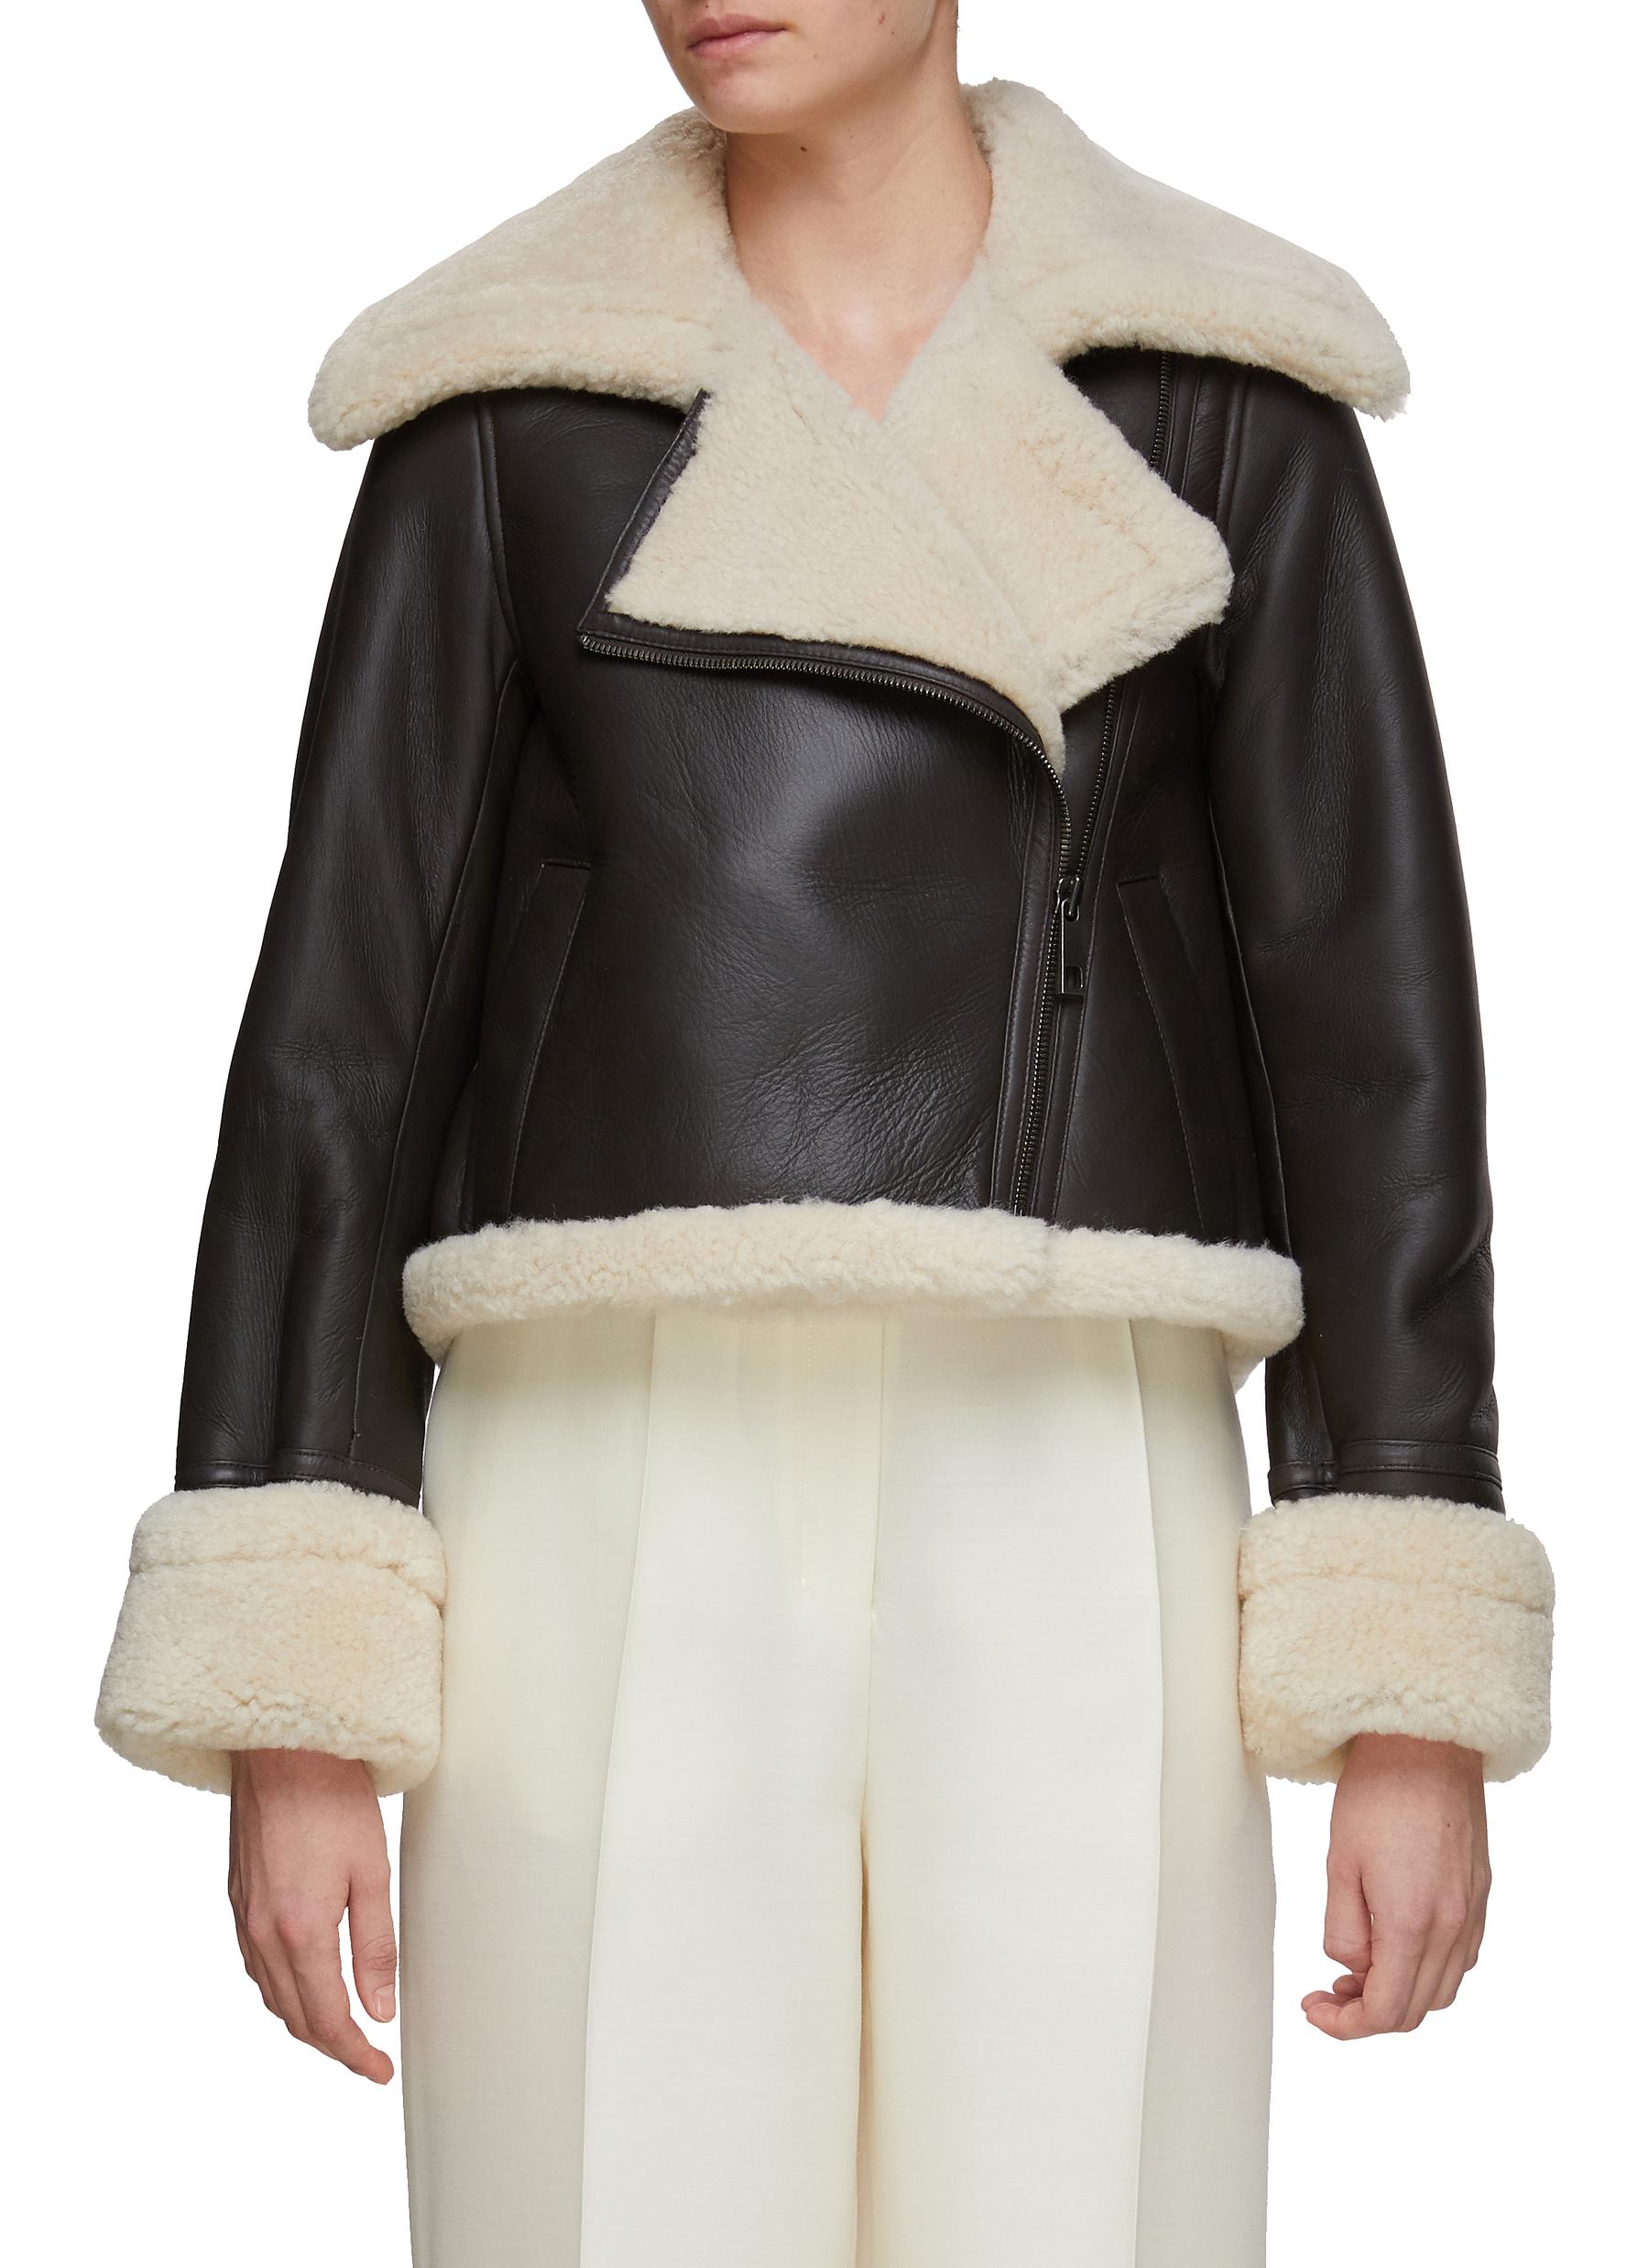 This Balenciaga Shearling Jacket Comes with All the Bragging